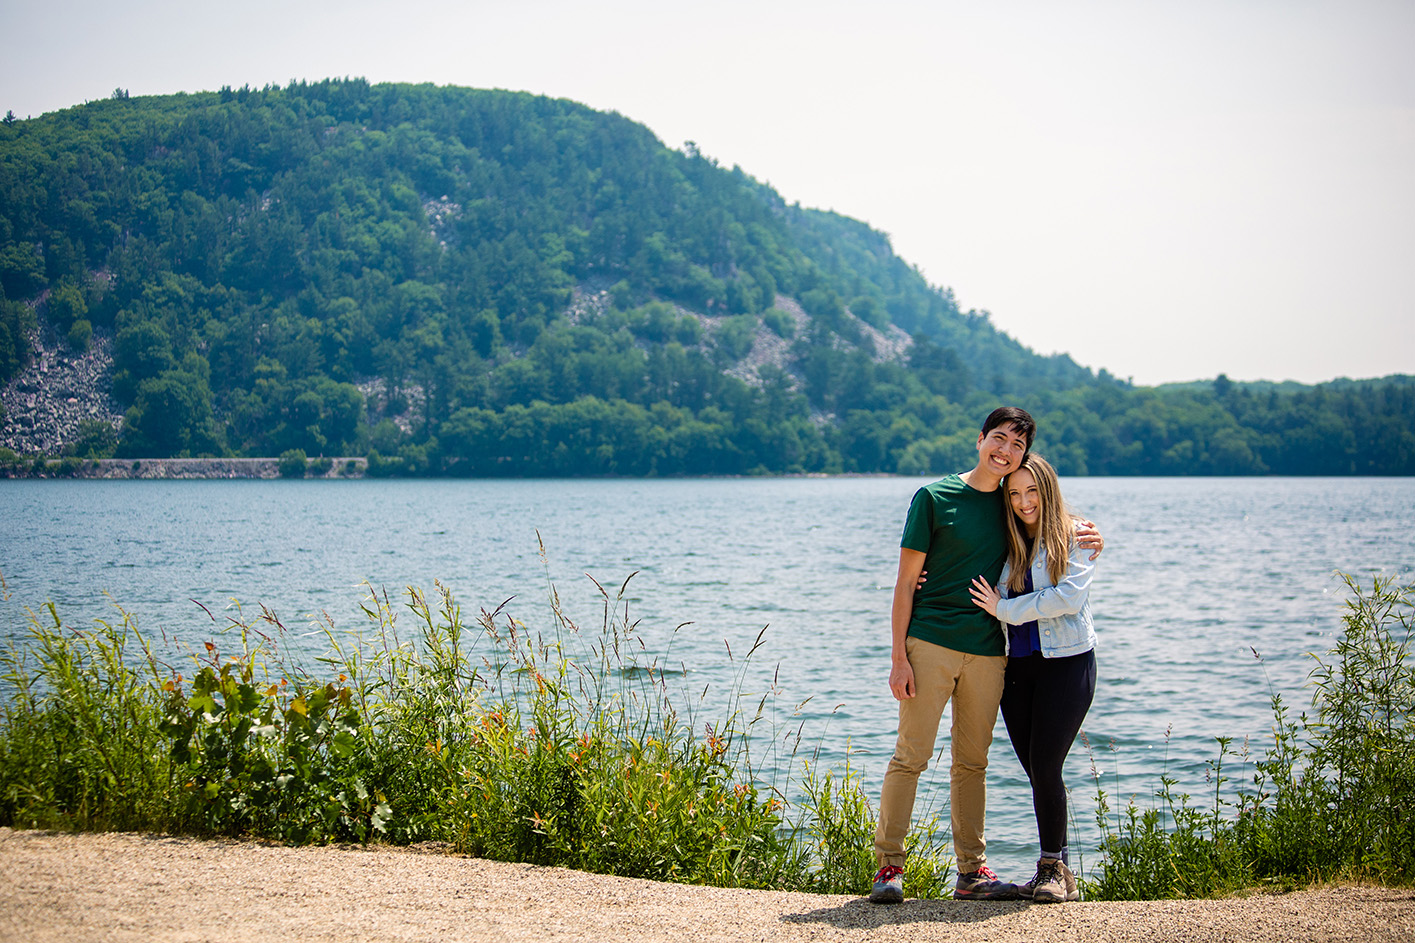 Gary and Natalie standing together in front of a lake.